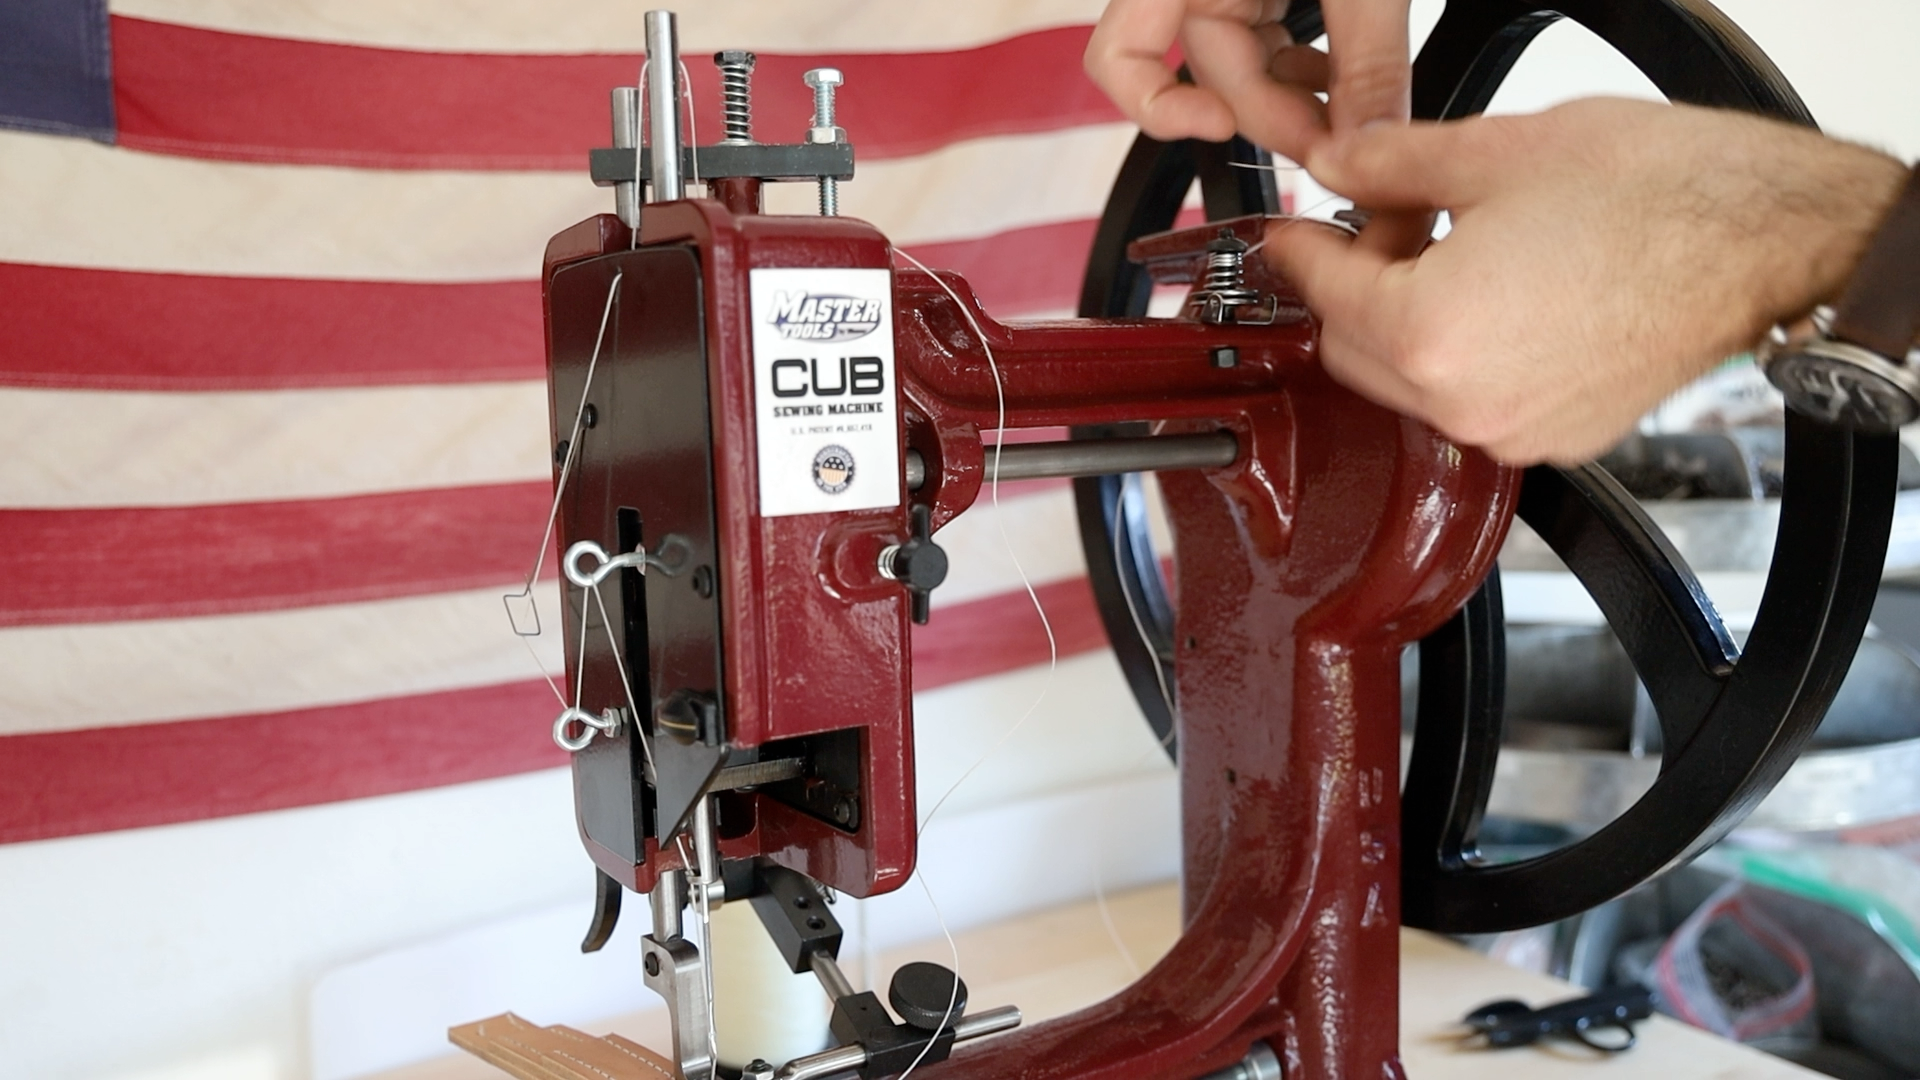 Master Tool Cub Manual Leather Sewing Machine, Aluminum – Weaver Leather  Supply